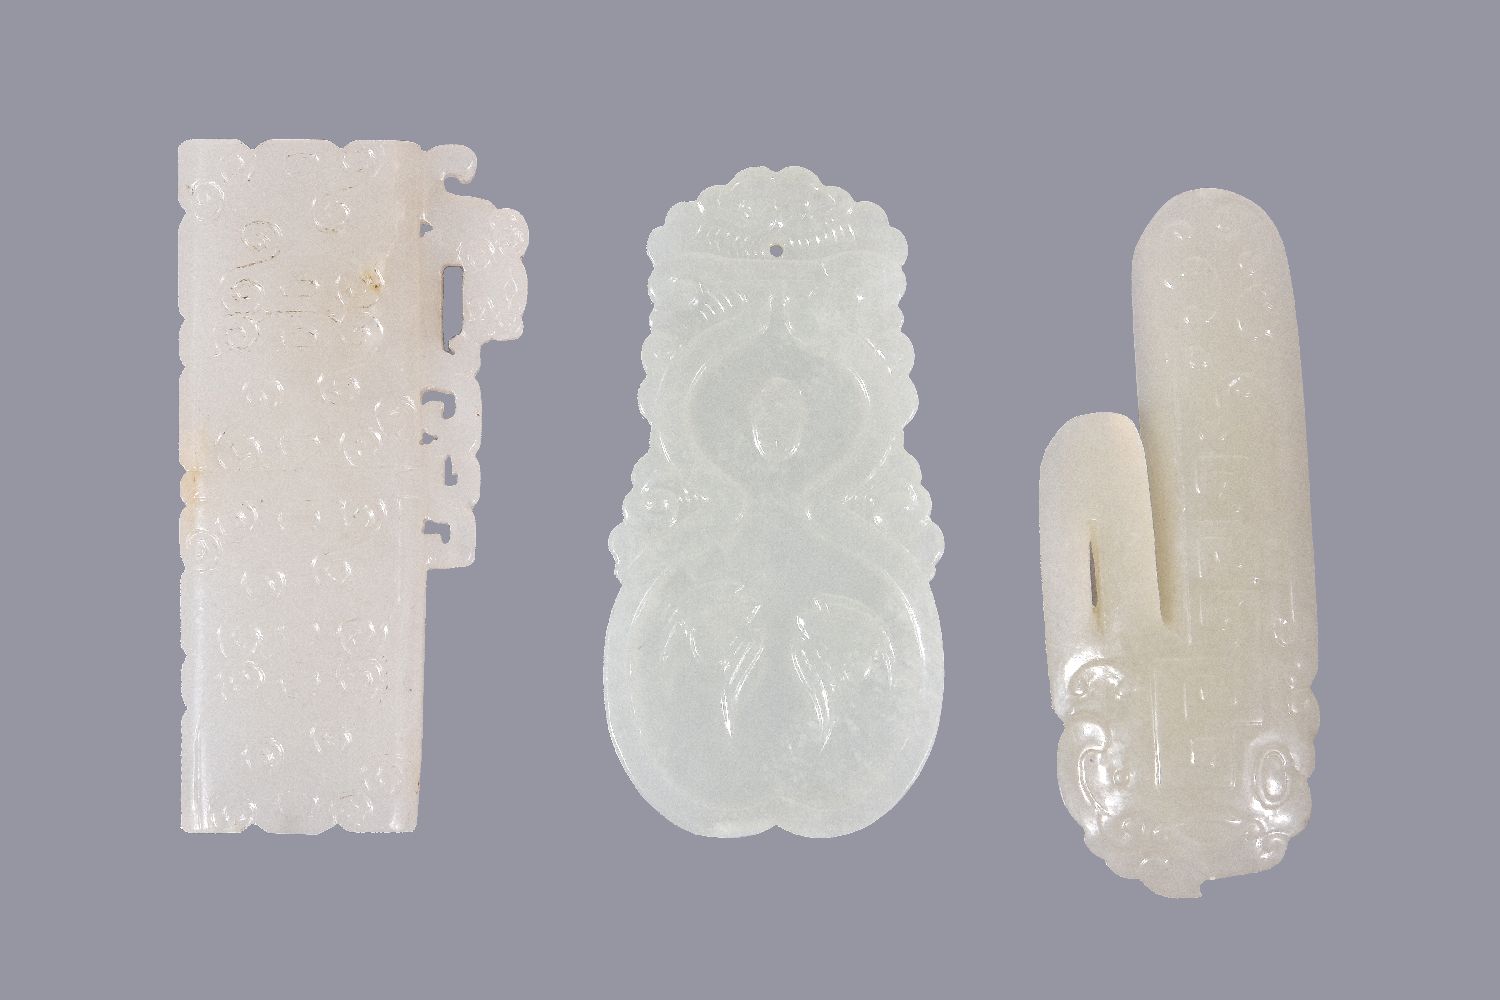 Three Chinese white jade archaistic carvings, the pale even stones with some mottled white